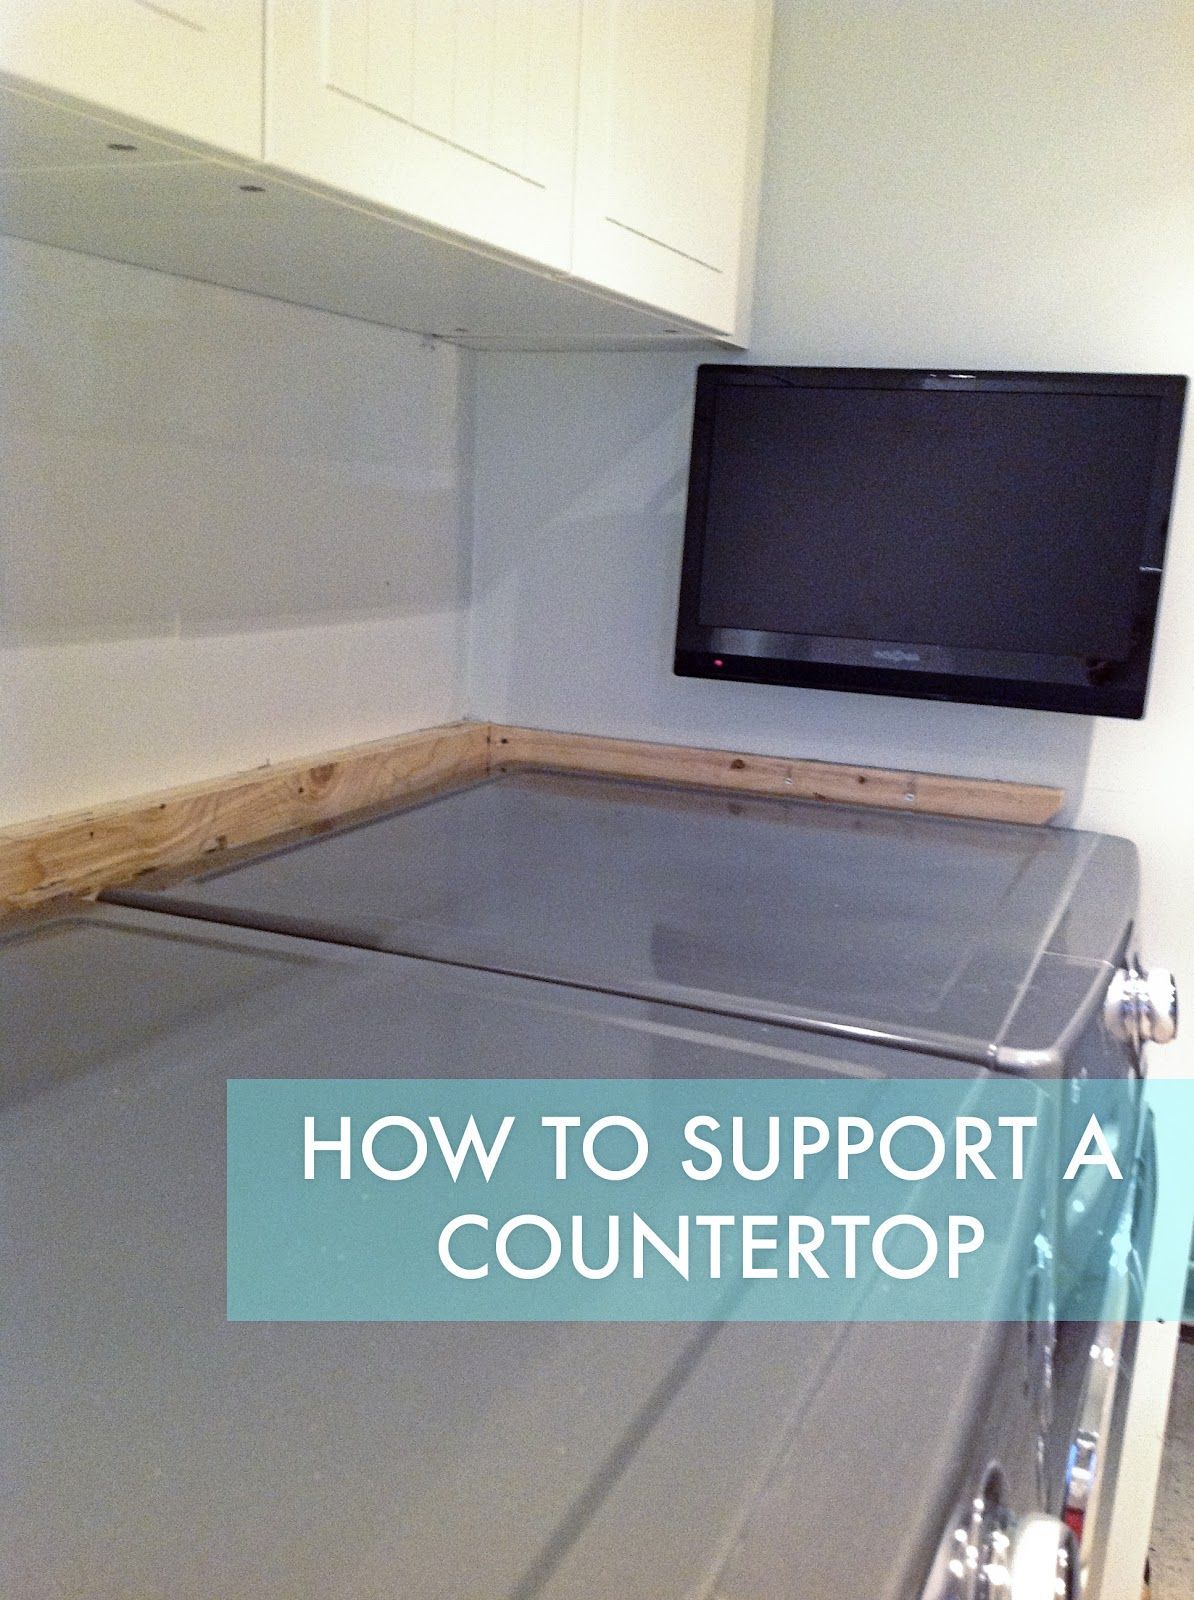 Rambling Renovators: How To Support A Laundry Room Countertop Over A Washer And Dryer - Rambling Renovators: How To Support A Laundry Room Countertop Over A Washer And Dryer -   12 diy Room renovation ideas